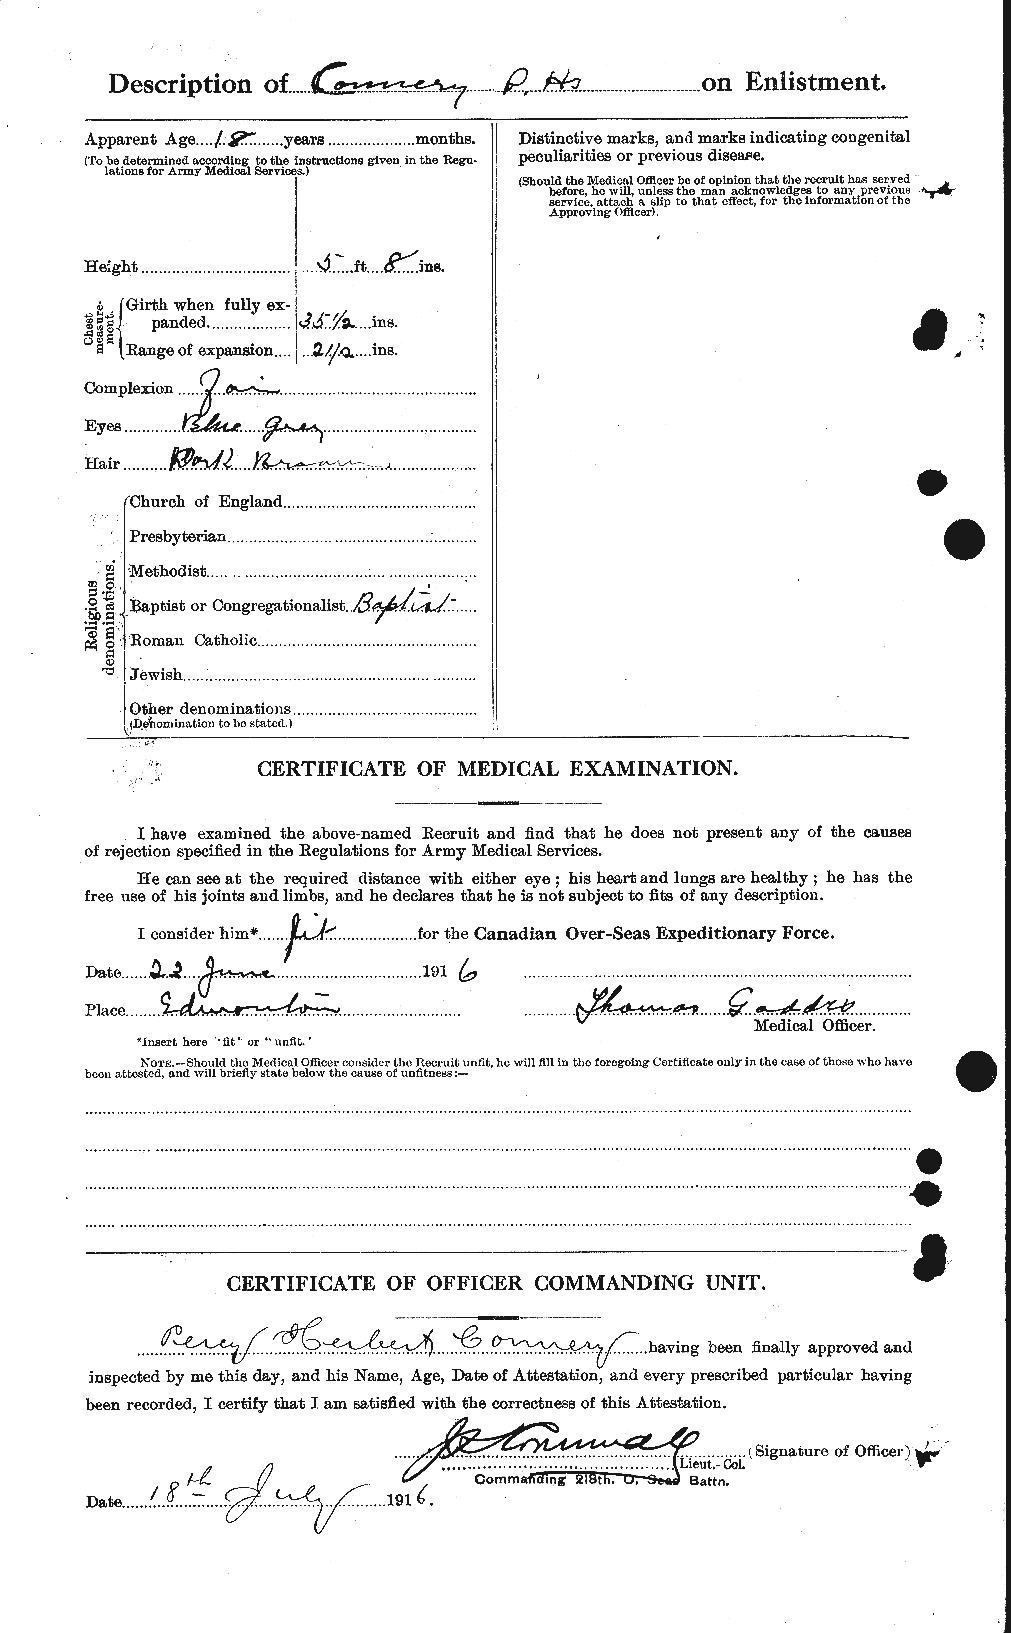 Attestation record: Percy Herbert Connery